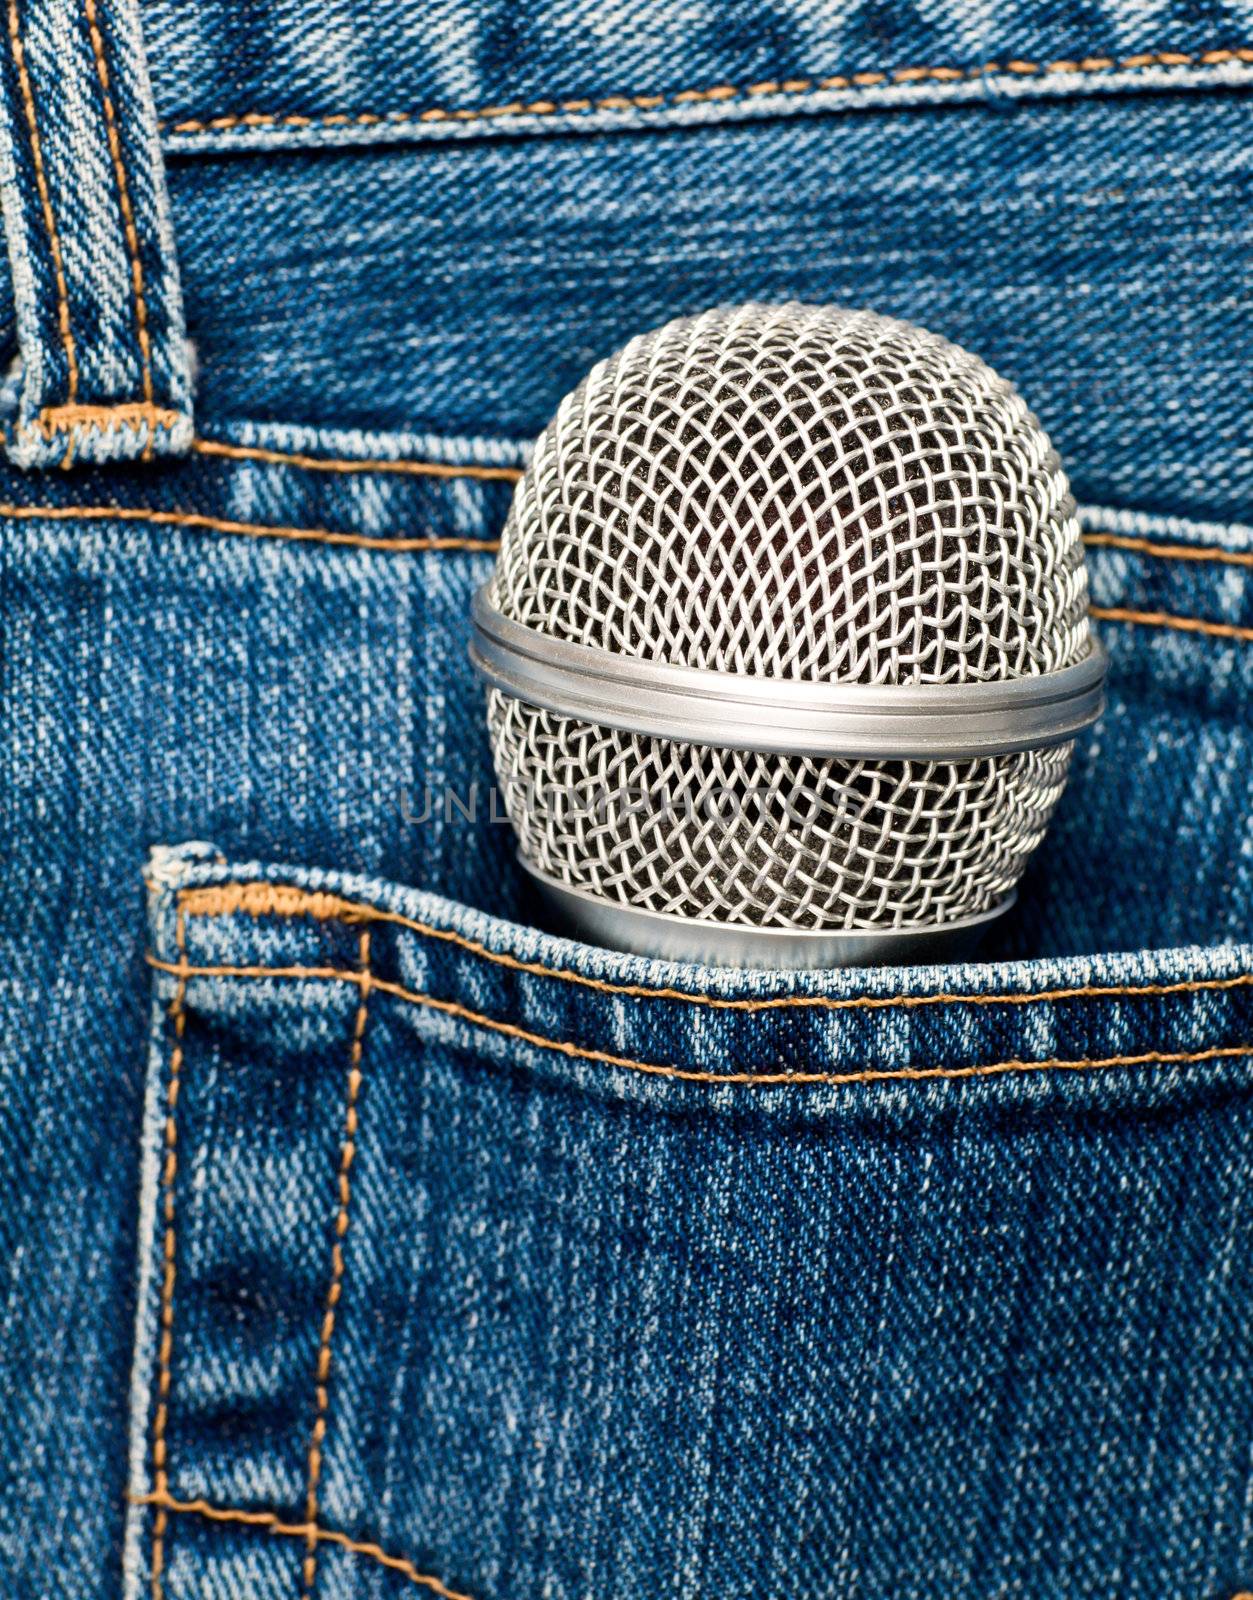 Microphone in a pocket by naumoid